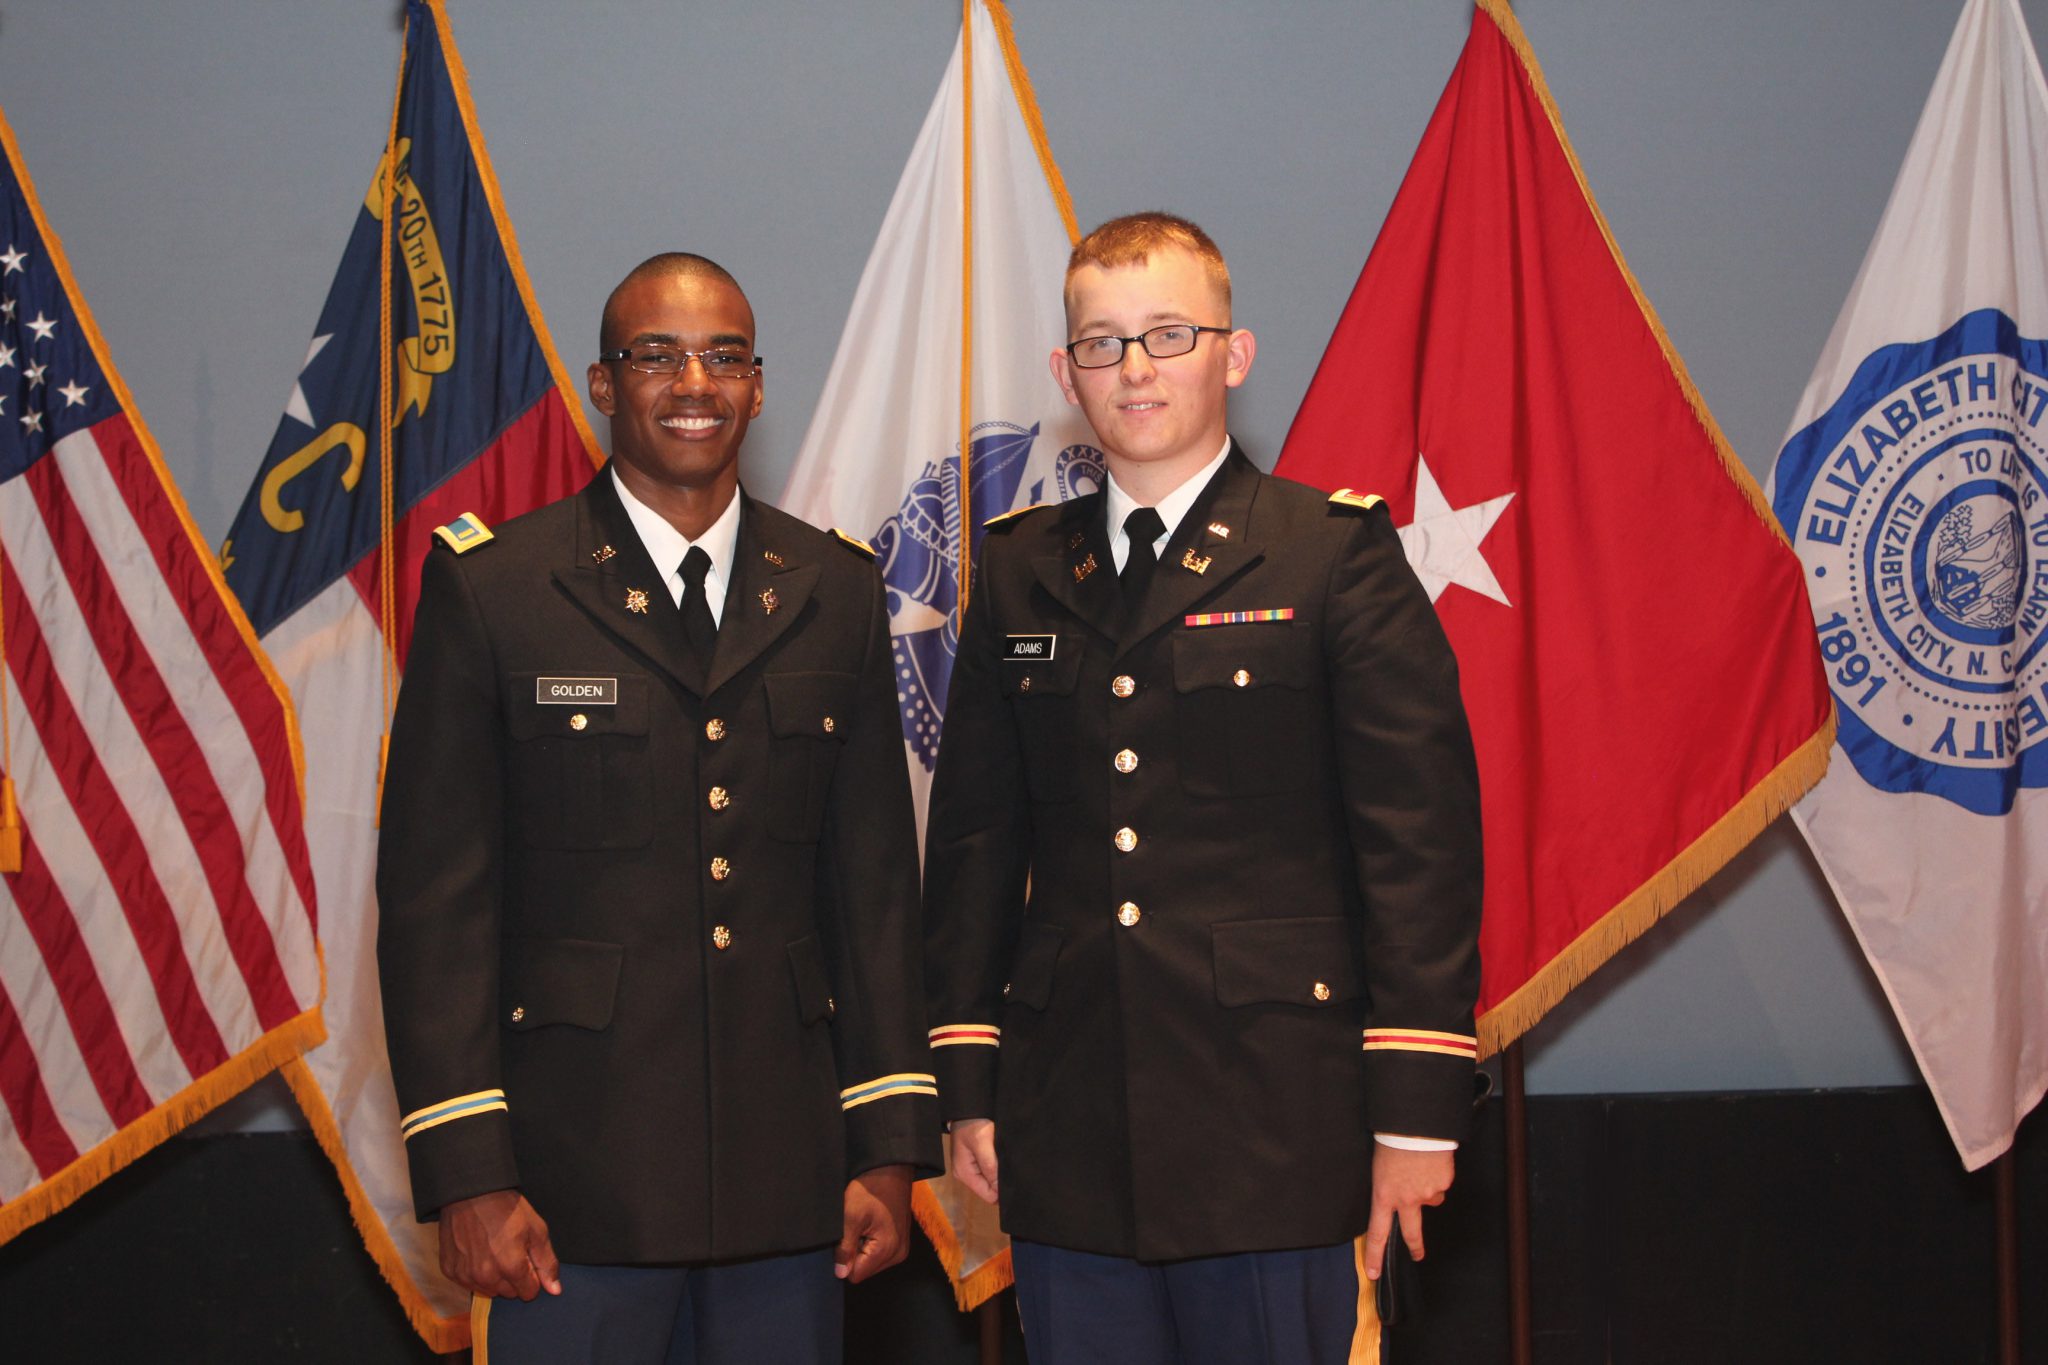 Two commissioned officers May 13